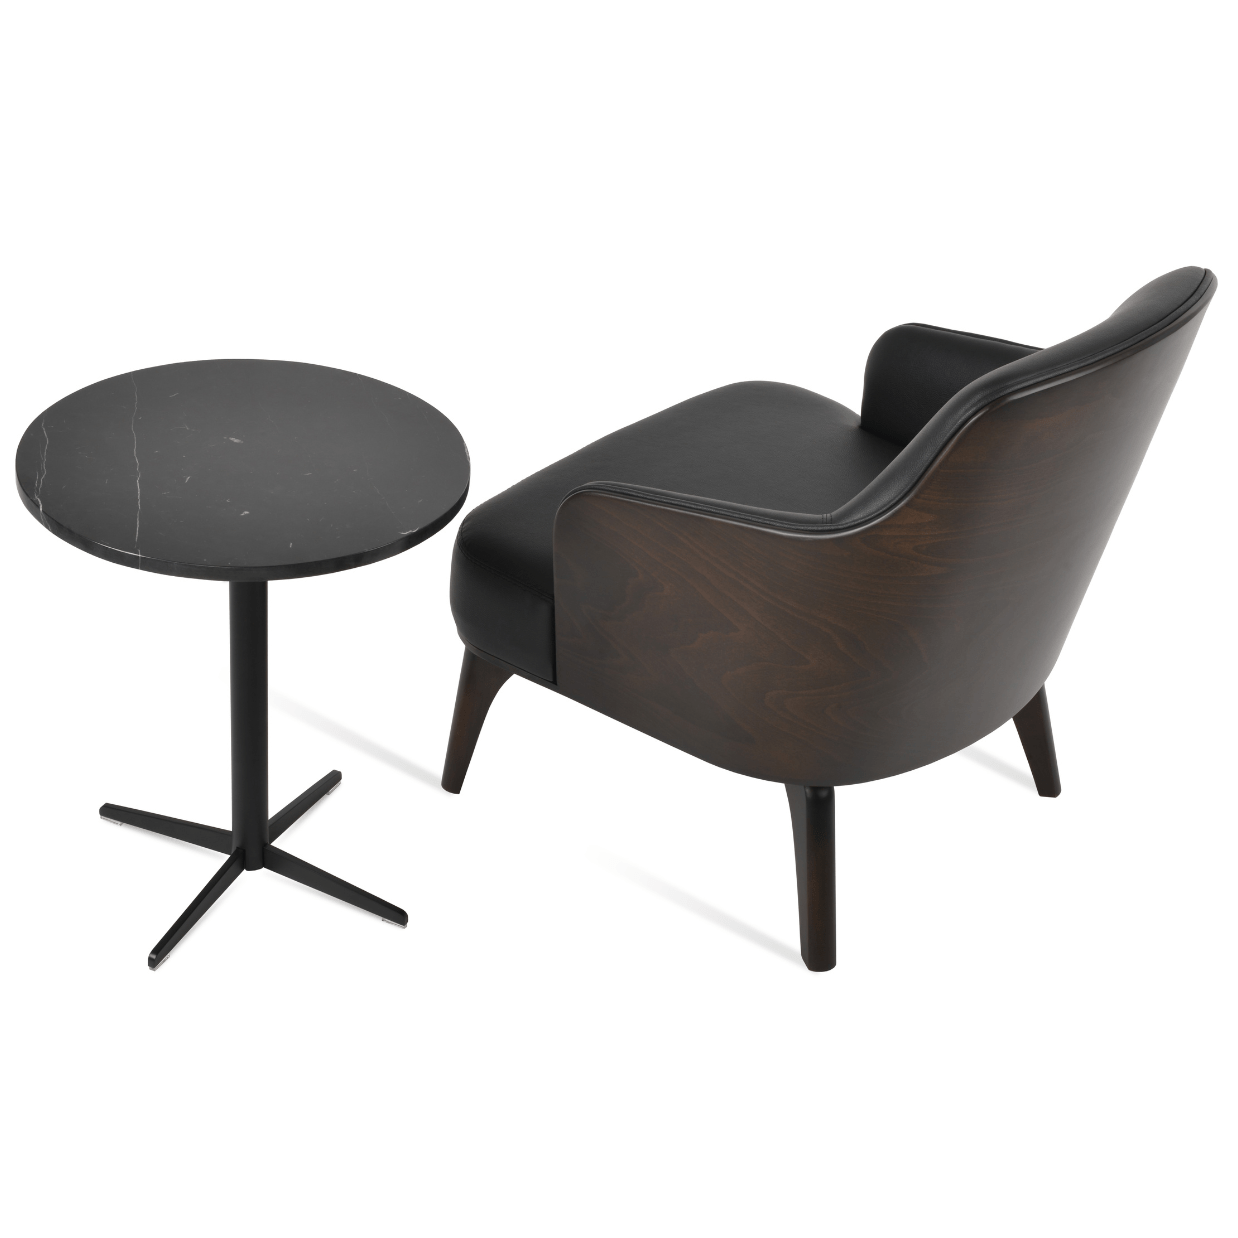 Saphire Rounded Black Leather Armchair - Your Bar Stools Canada